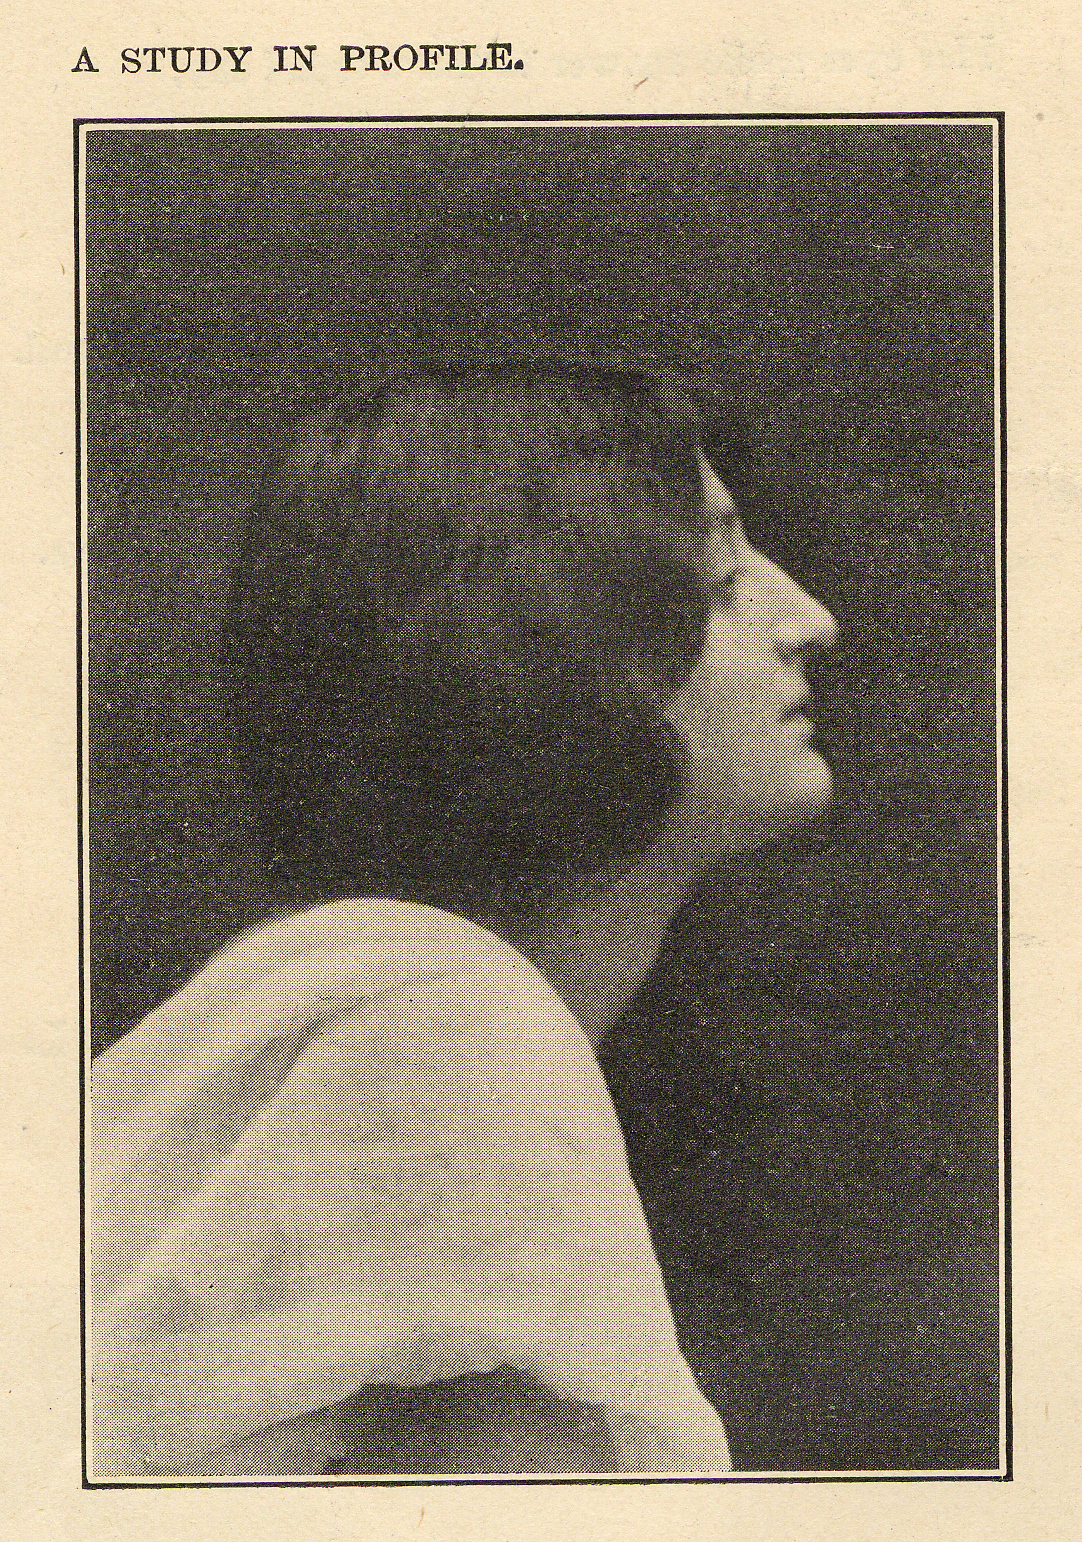 A Study in Profile. Illustration showing a head and shoulders profile portrait photograph of a woman accompanying the photograher's article "The New Photography-What it has done and is doing for Modern Portraiture." Published in: Metropolitan Magazine, Sept, 1901.